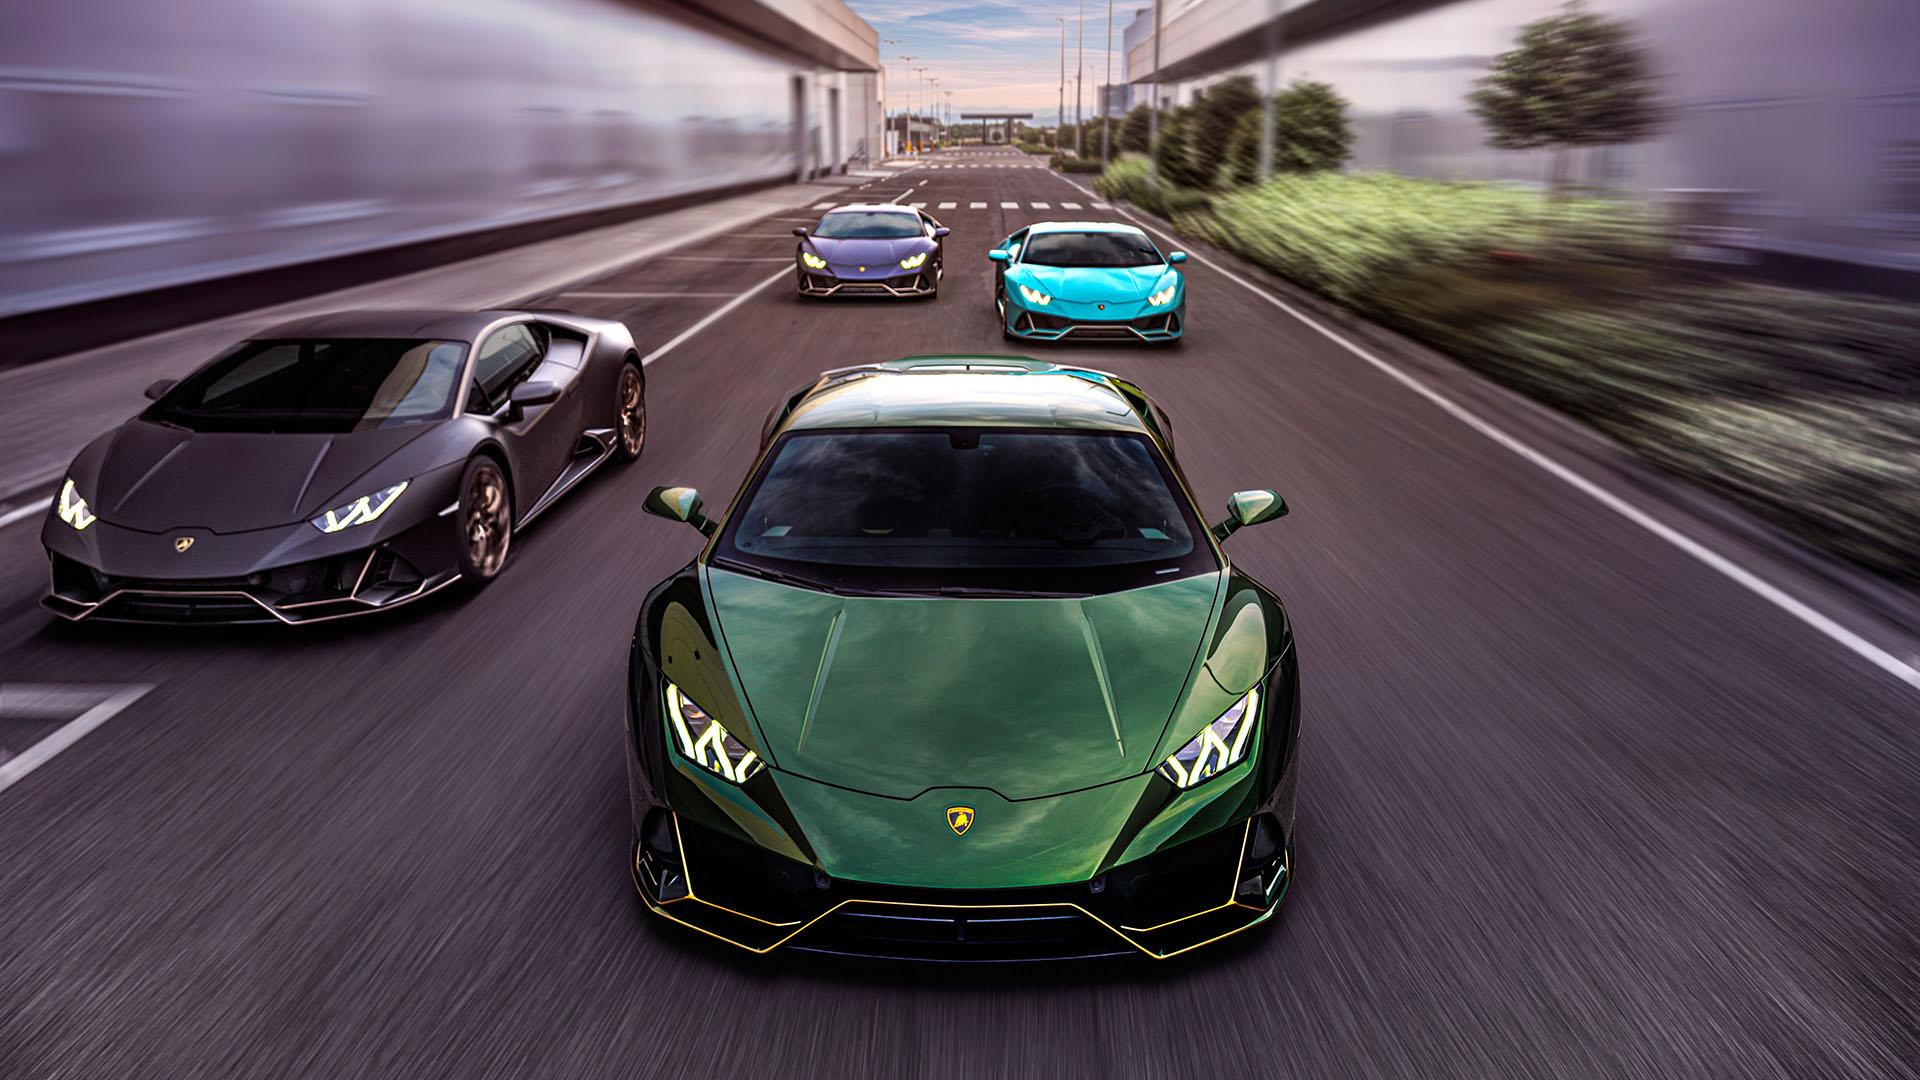 Lamborghini received twice as much awards as in 2019 - LamboCARS